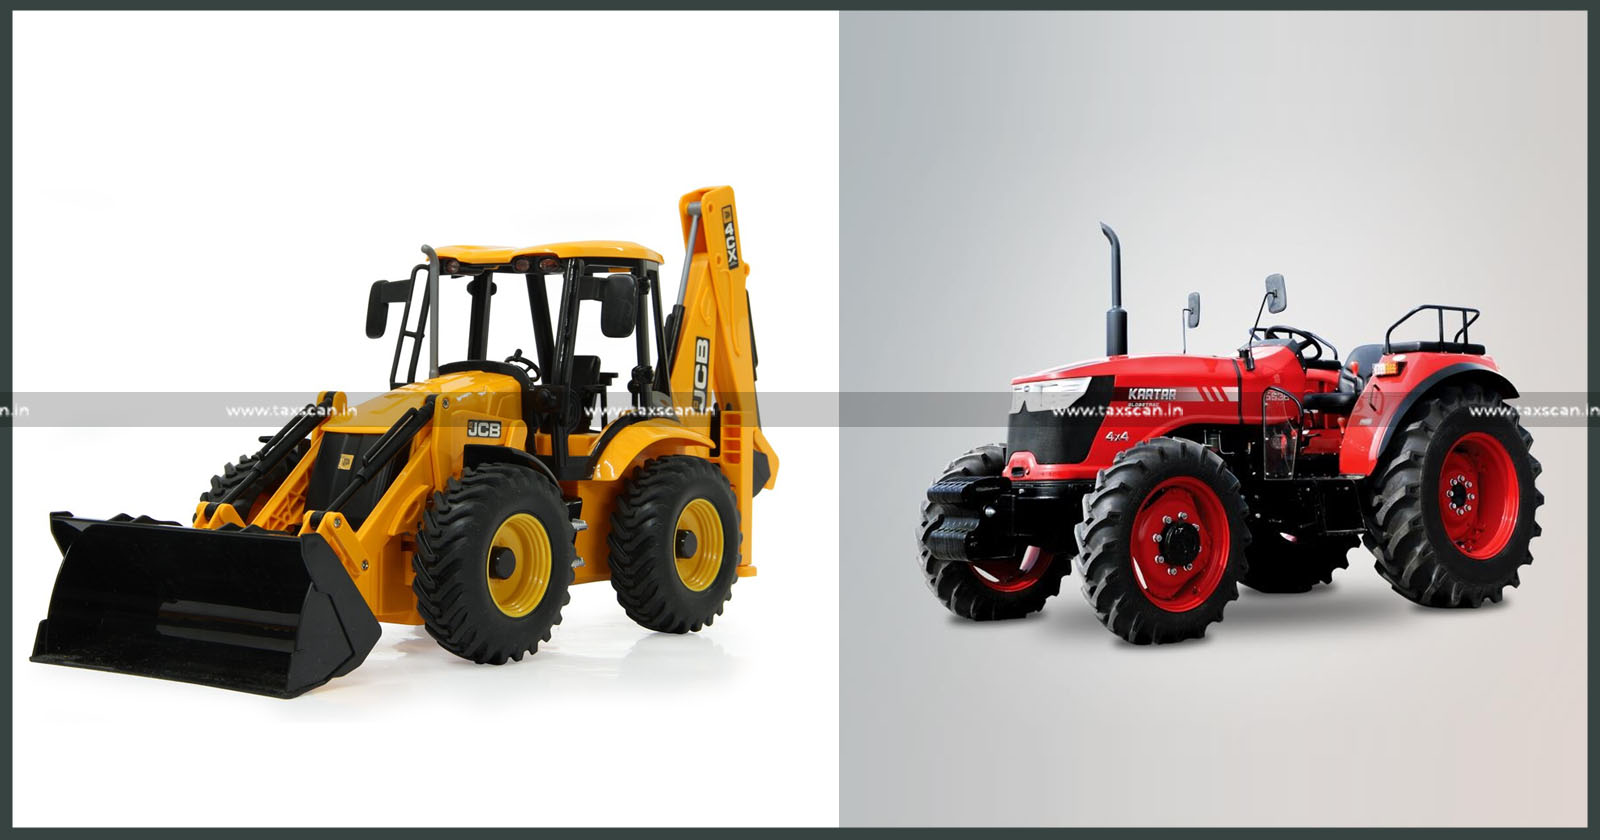 Demand of Service Tax - Demand - Service Tax - Use of JCB and Tractors on Rental Basis - Relevant Documents - CESTAT - Re-adjudication - Taxscan